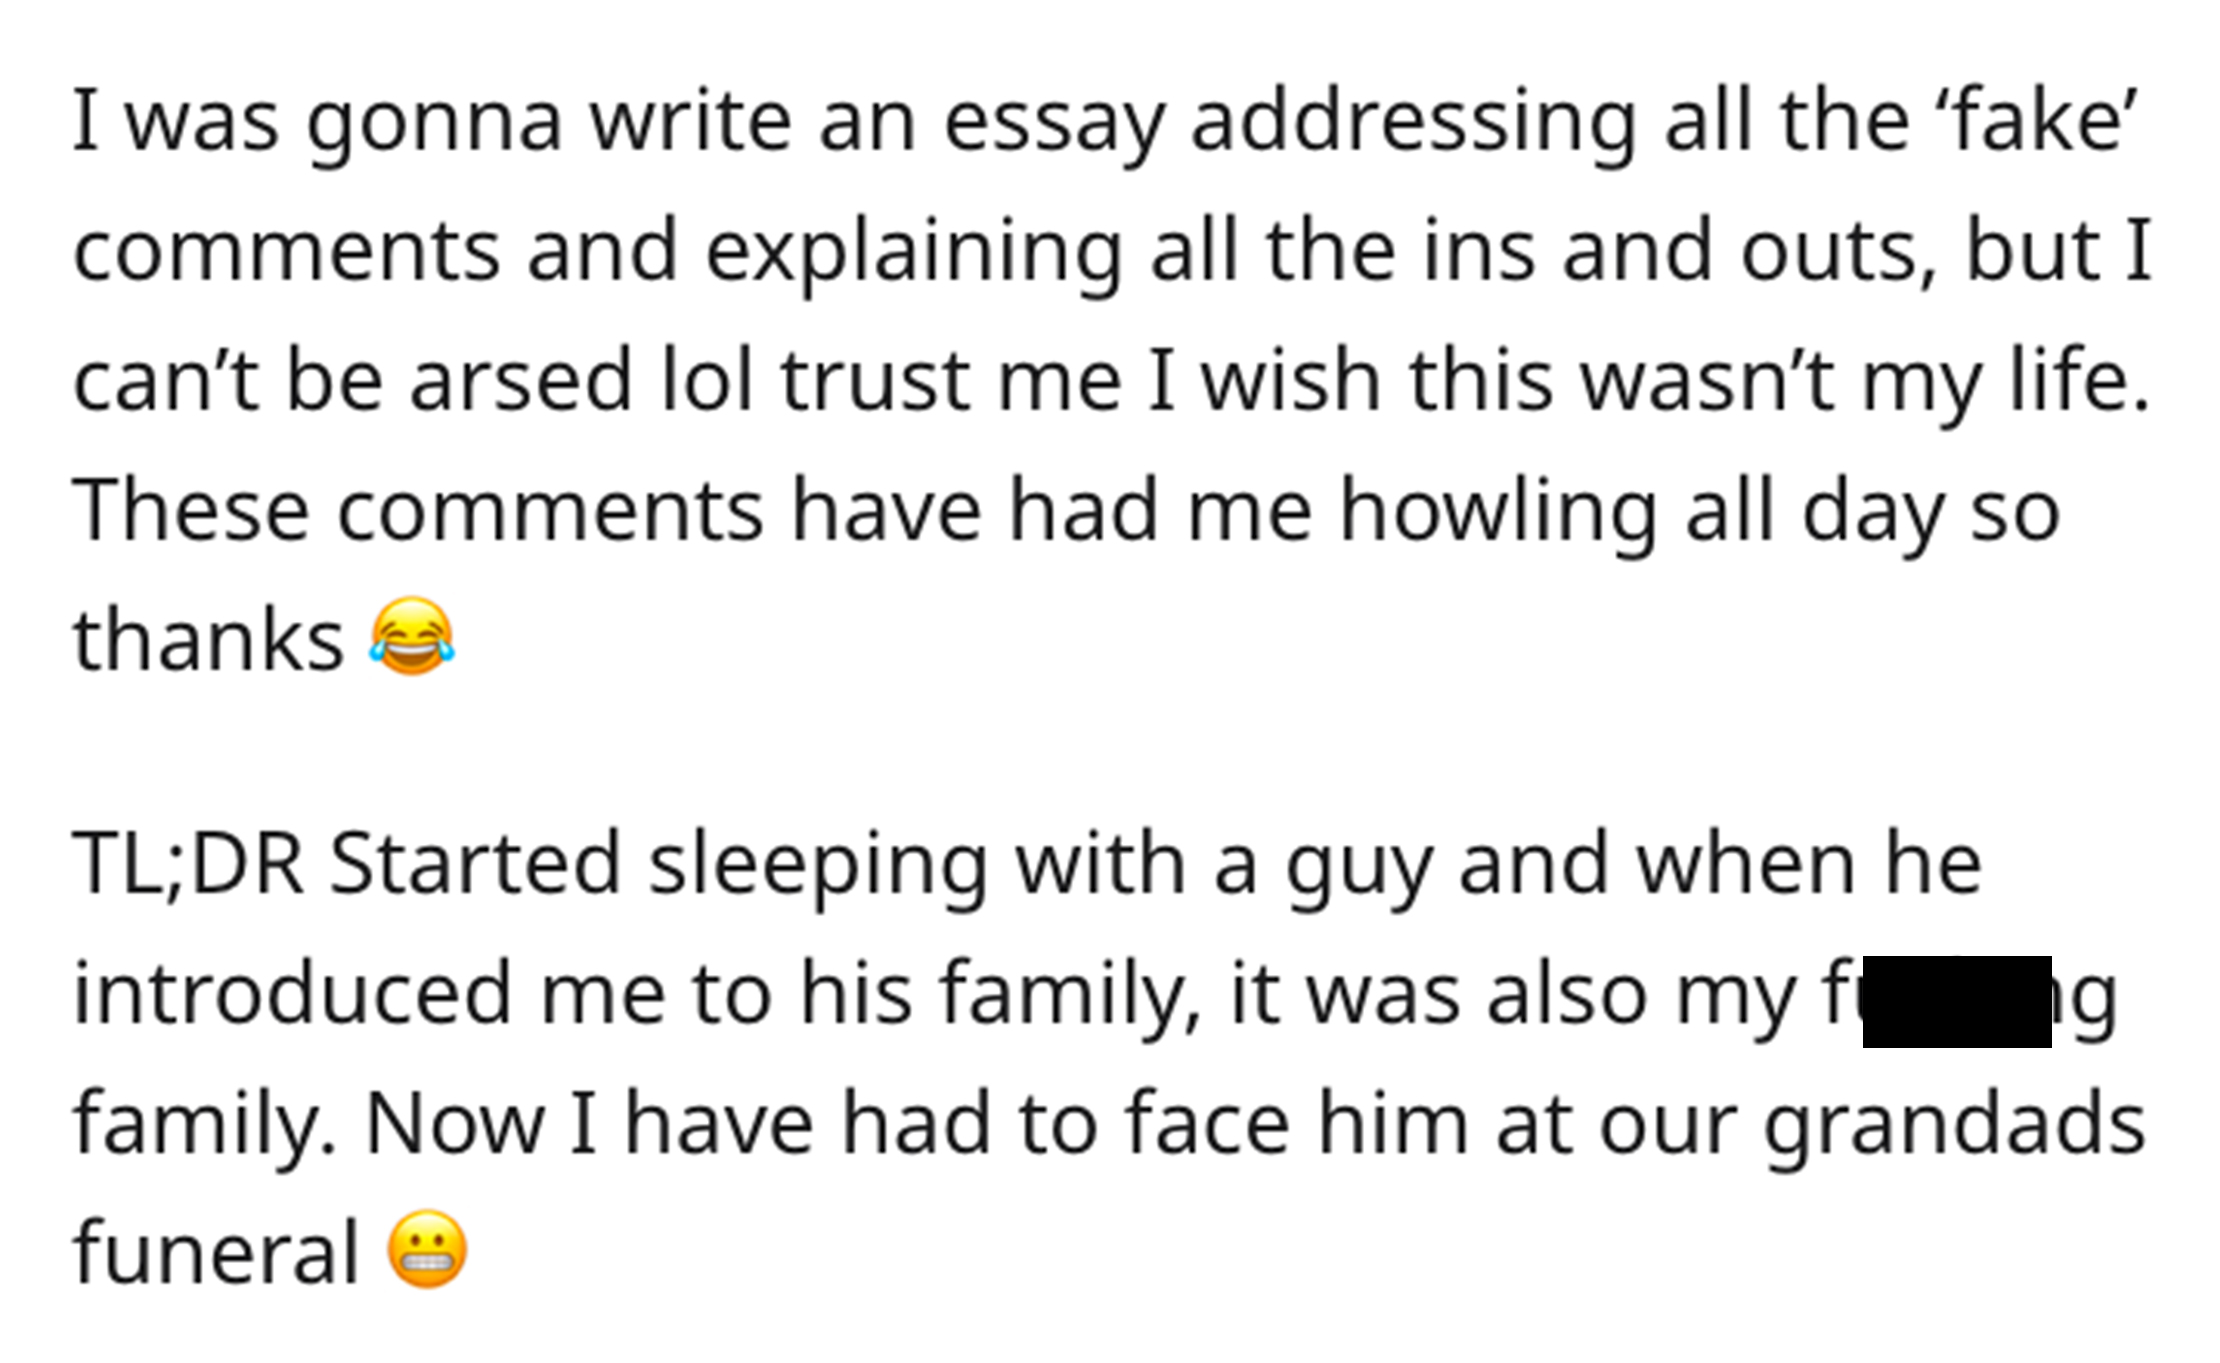 Cousins Sleep Together Reddit - paper - I was gonna write an essay addressing all the 'fake' and explaining all the ins and outs, but I can't be arsed lol trust me I wish this wasn't my life. These have had me howling all day so thanks Tl;Dr Started sleep